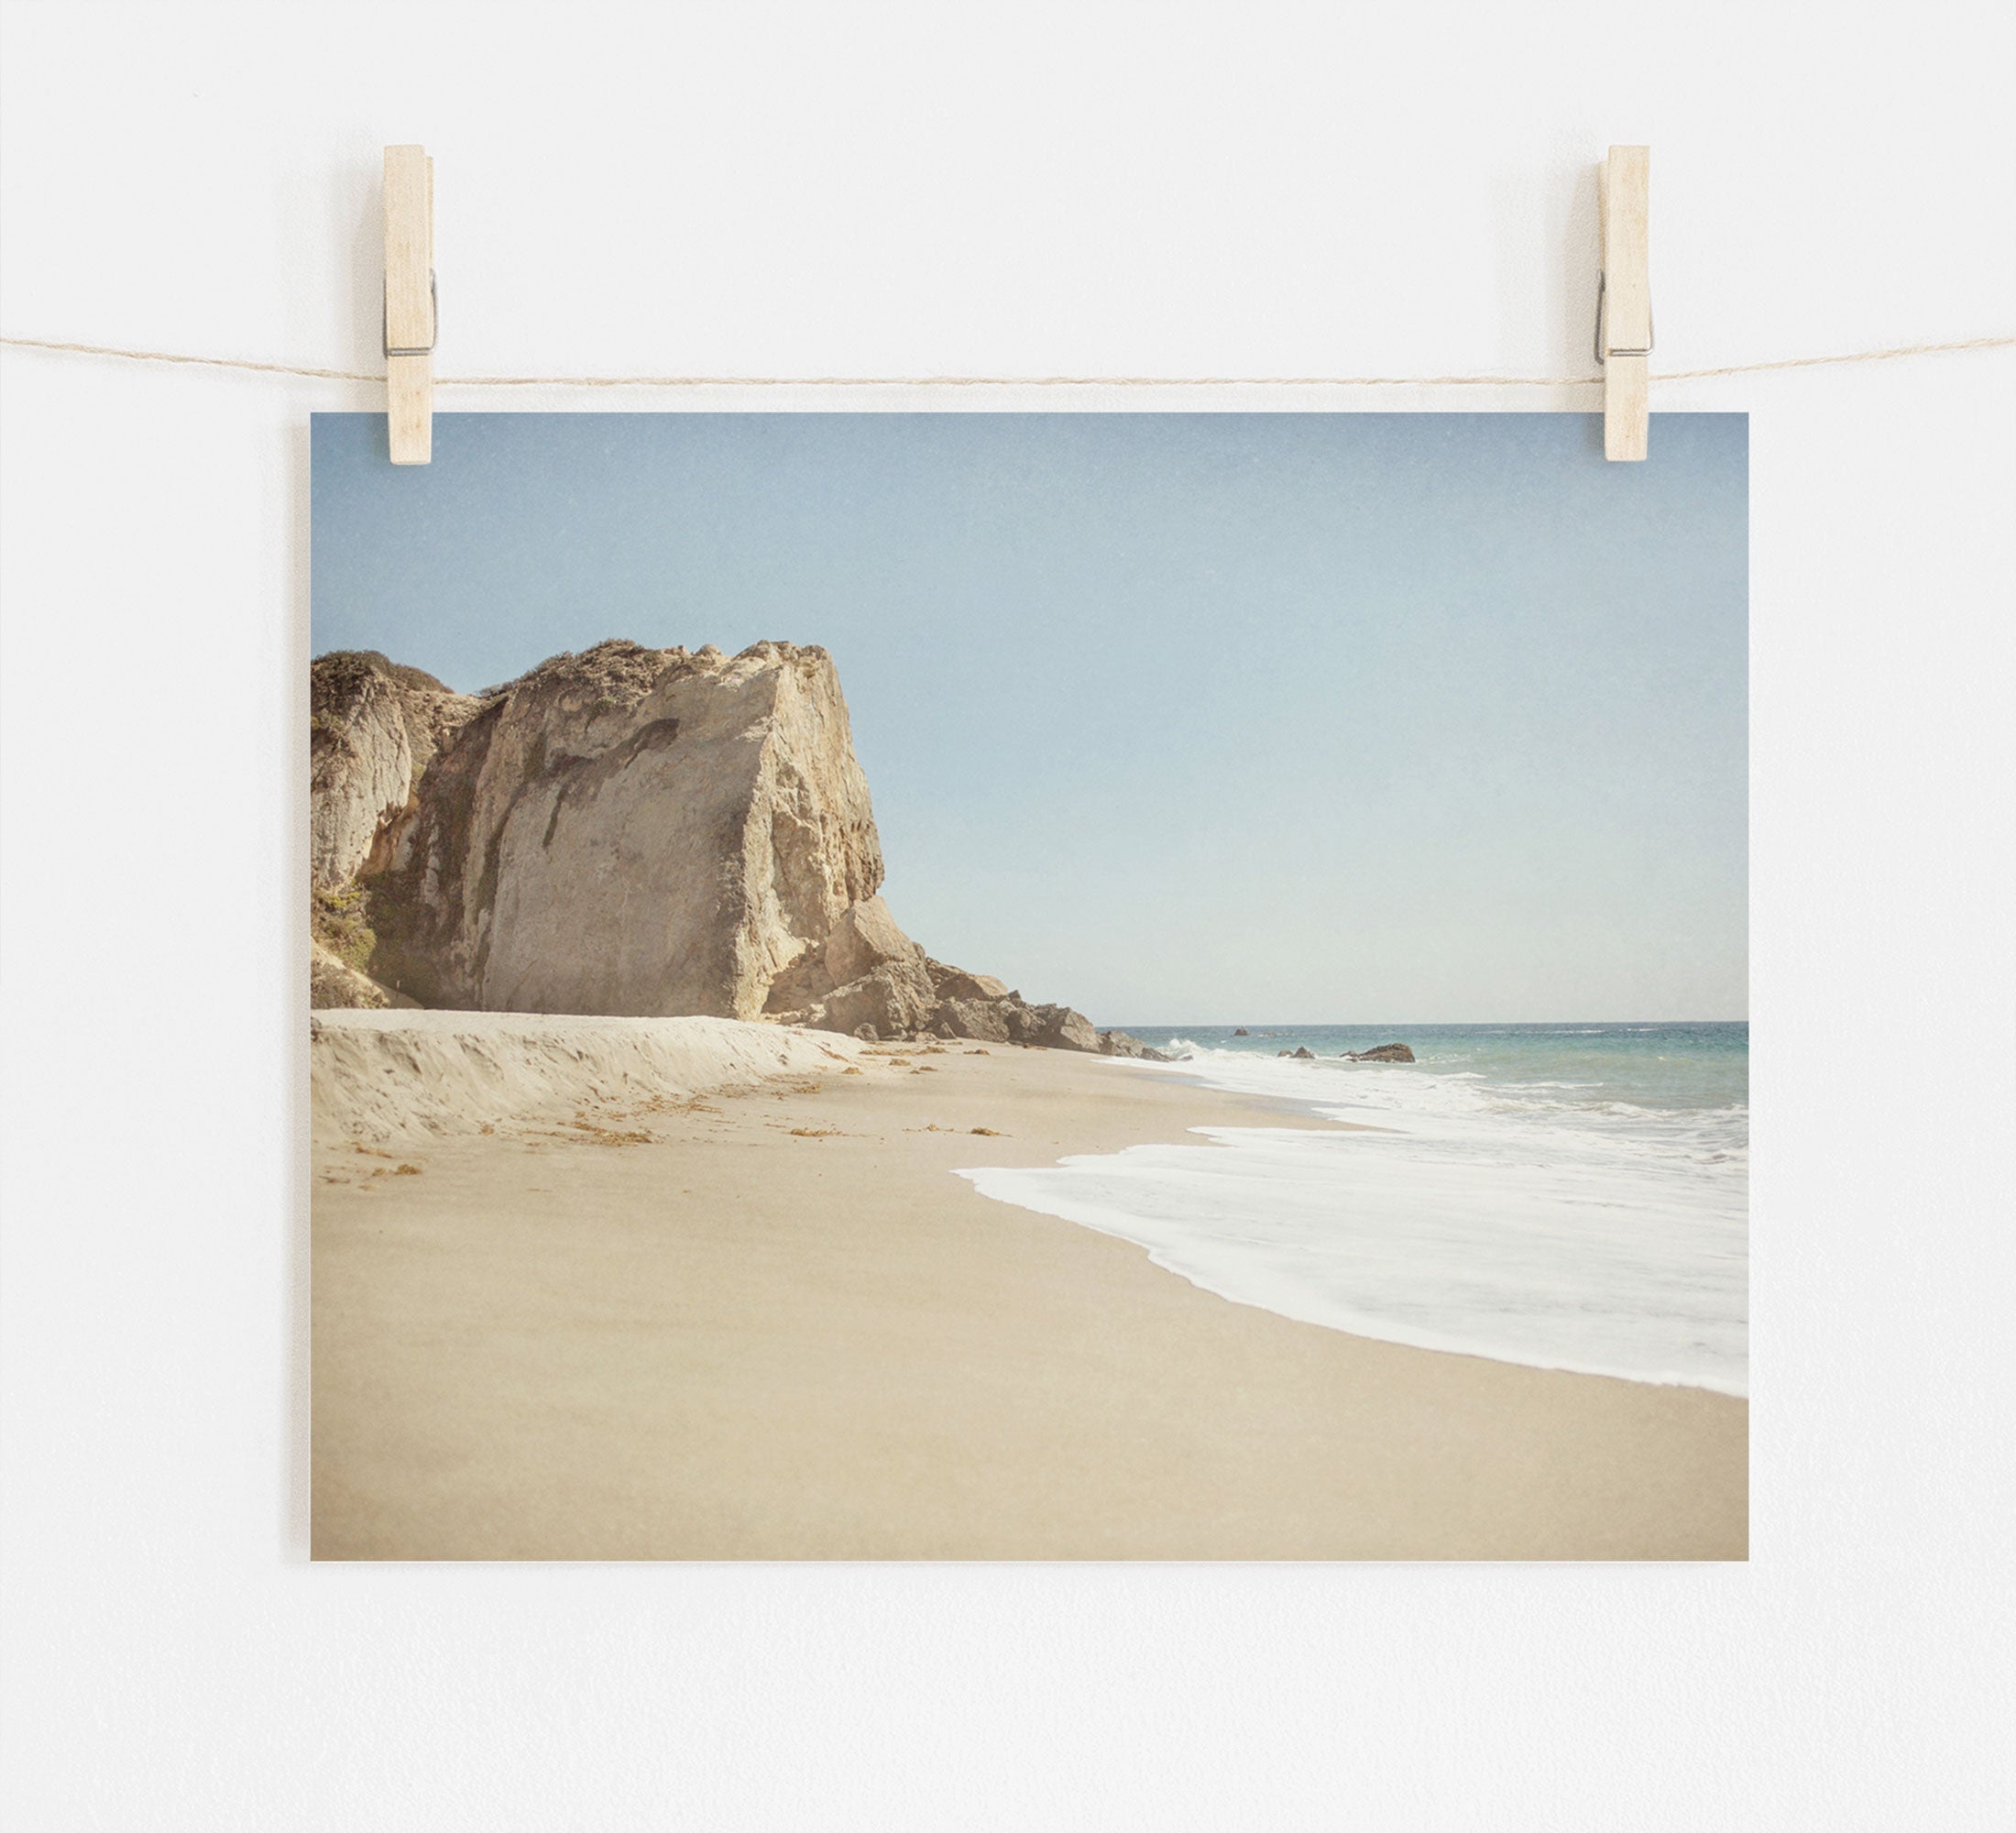 A photo of Offley Green&#39;s California Malibu Print, &#39;Point Dume&#39; with waves gently lapping the shore and a large rocky outcrop to the left. The picture is pinned to a wall by wooden clothespins.